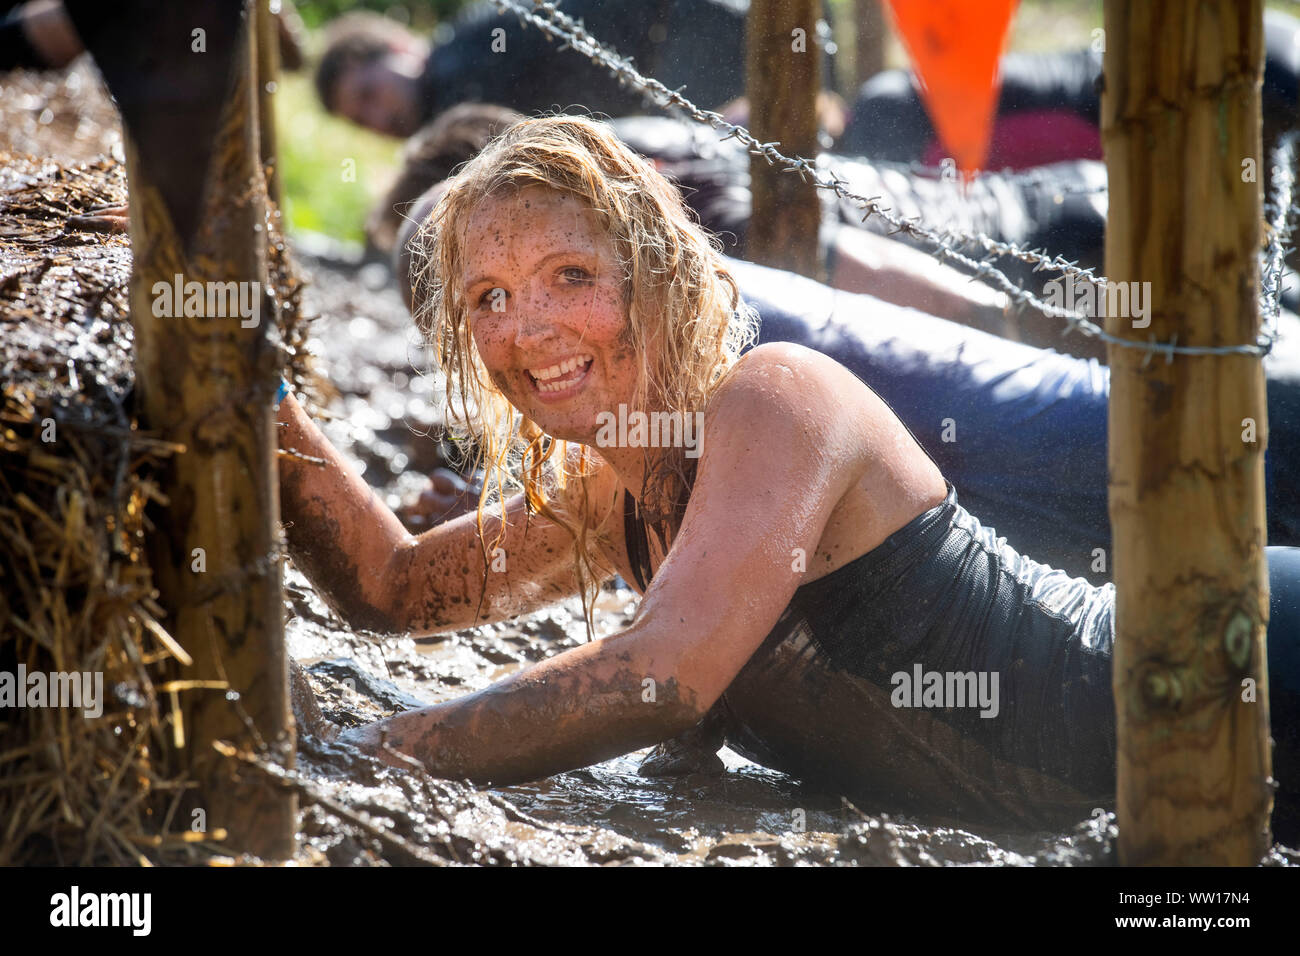 A competitor on the ‘Get Low’ obstacle at the Tough Mudder endurance event in Badminton Park, Gloucestershire UK Stock Photo